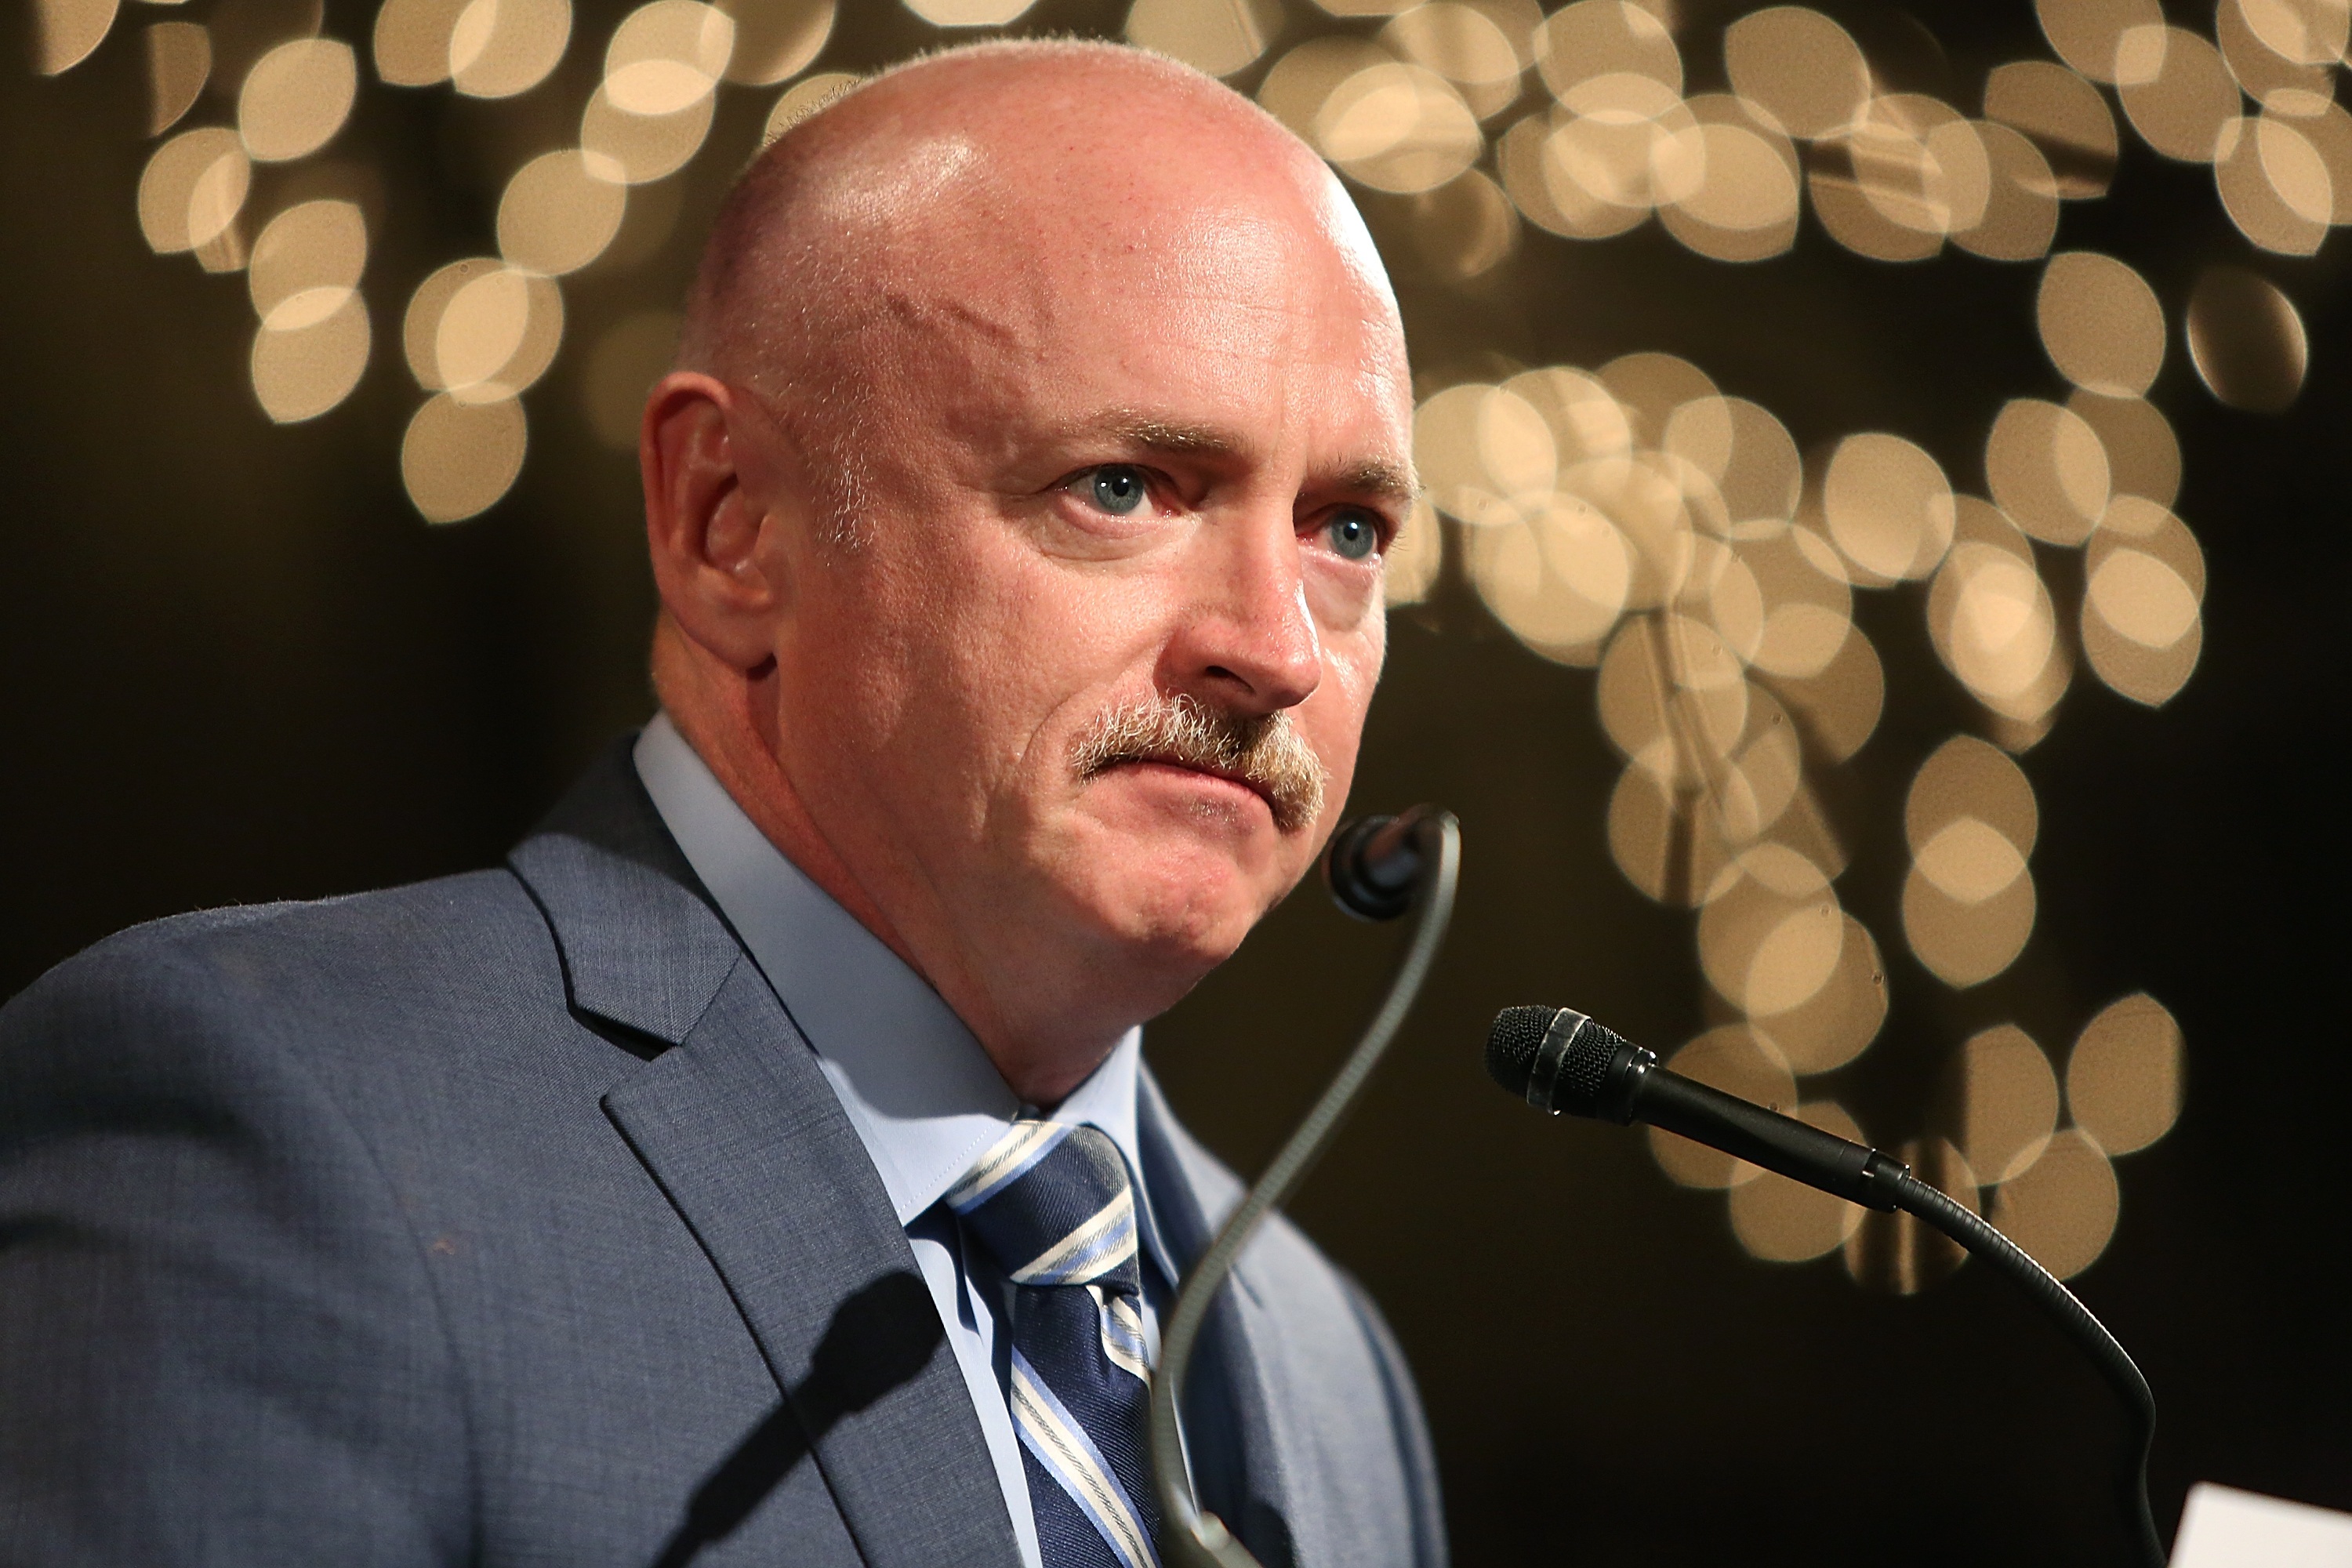 Captain Mark Kelly speaks at the 'Not One More' Event in New York City on Feb. 10, 2015. (Monica Schipper—2015 Getty Images)